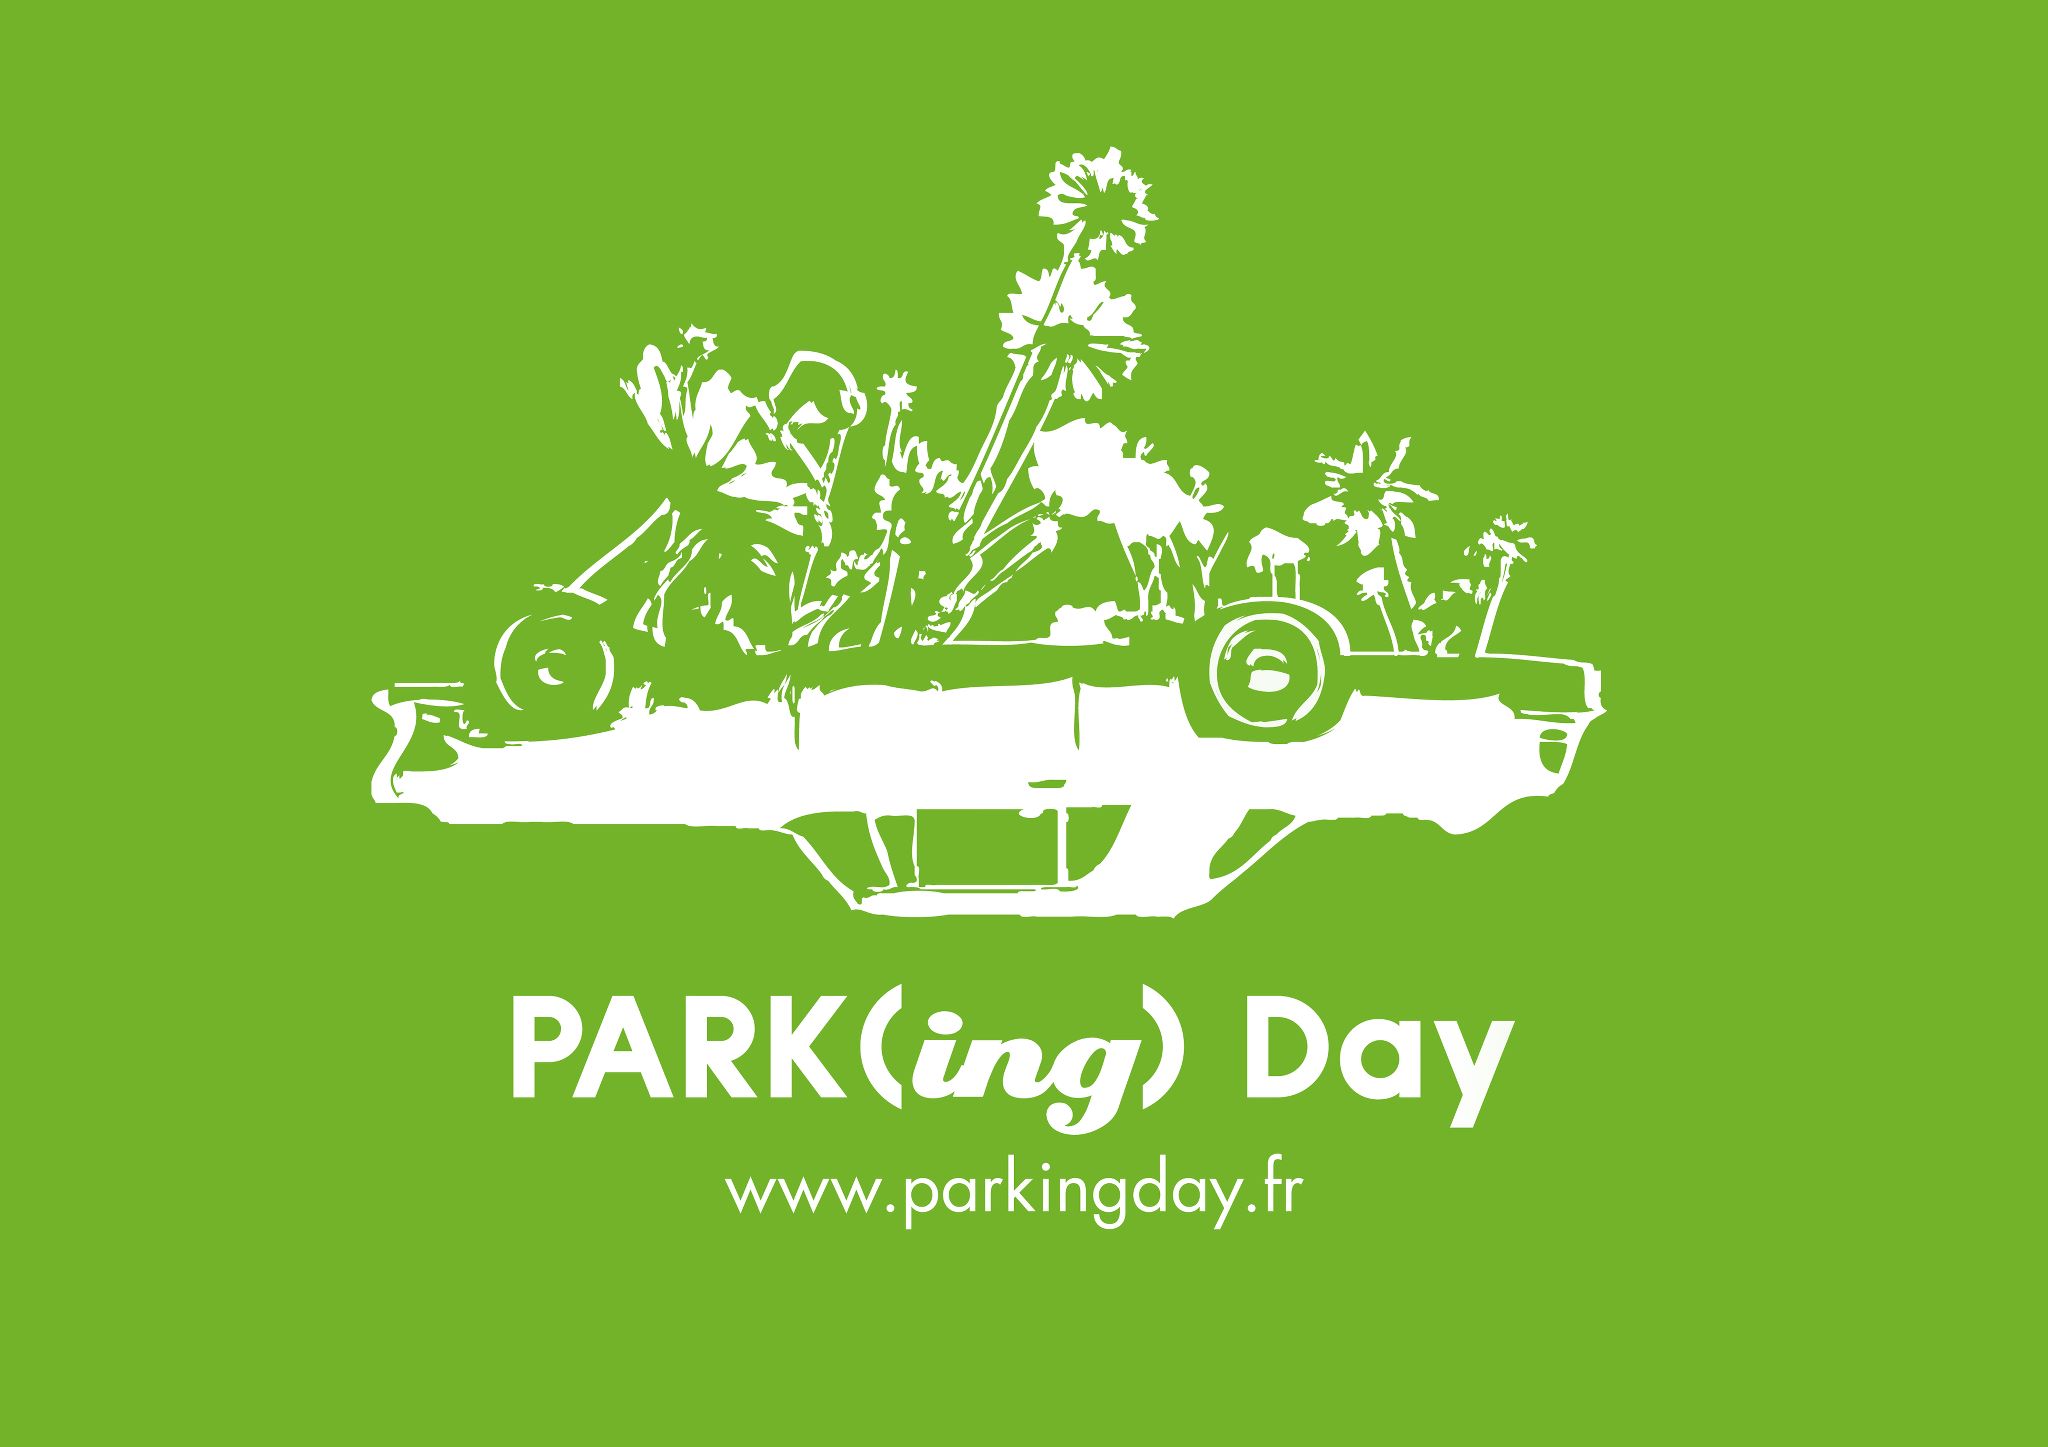 Parking Day reinvents the city